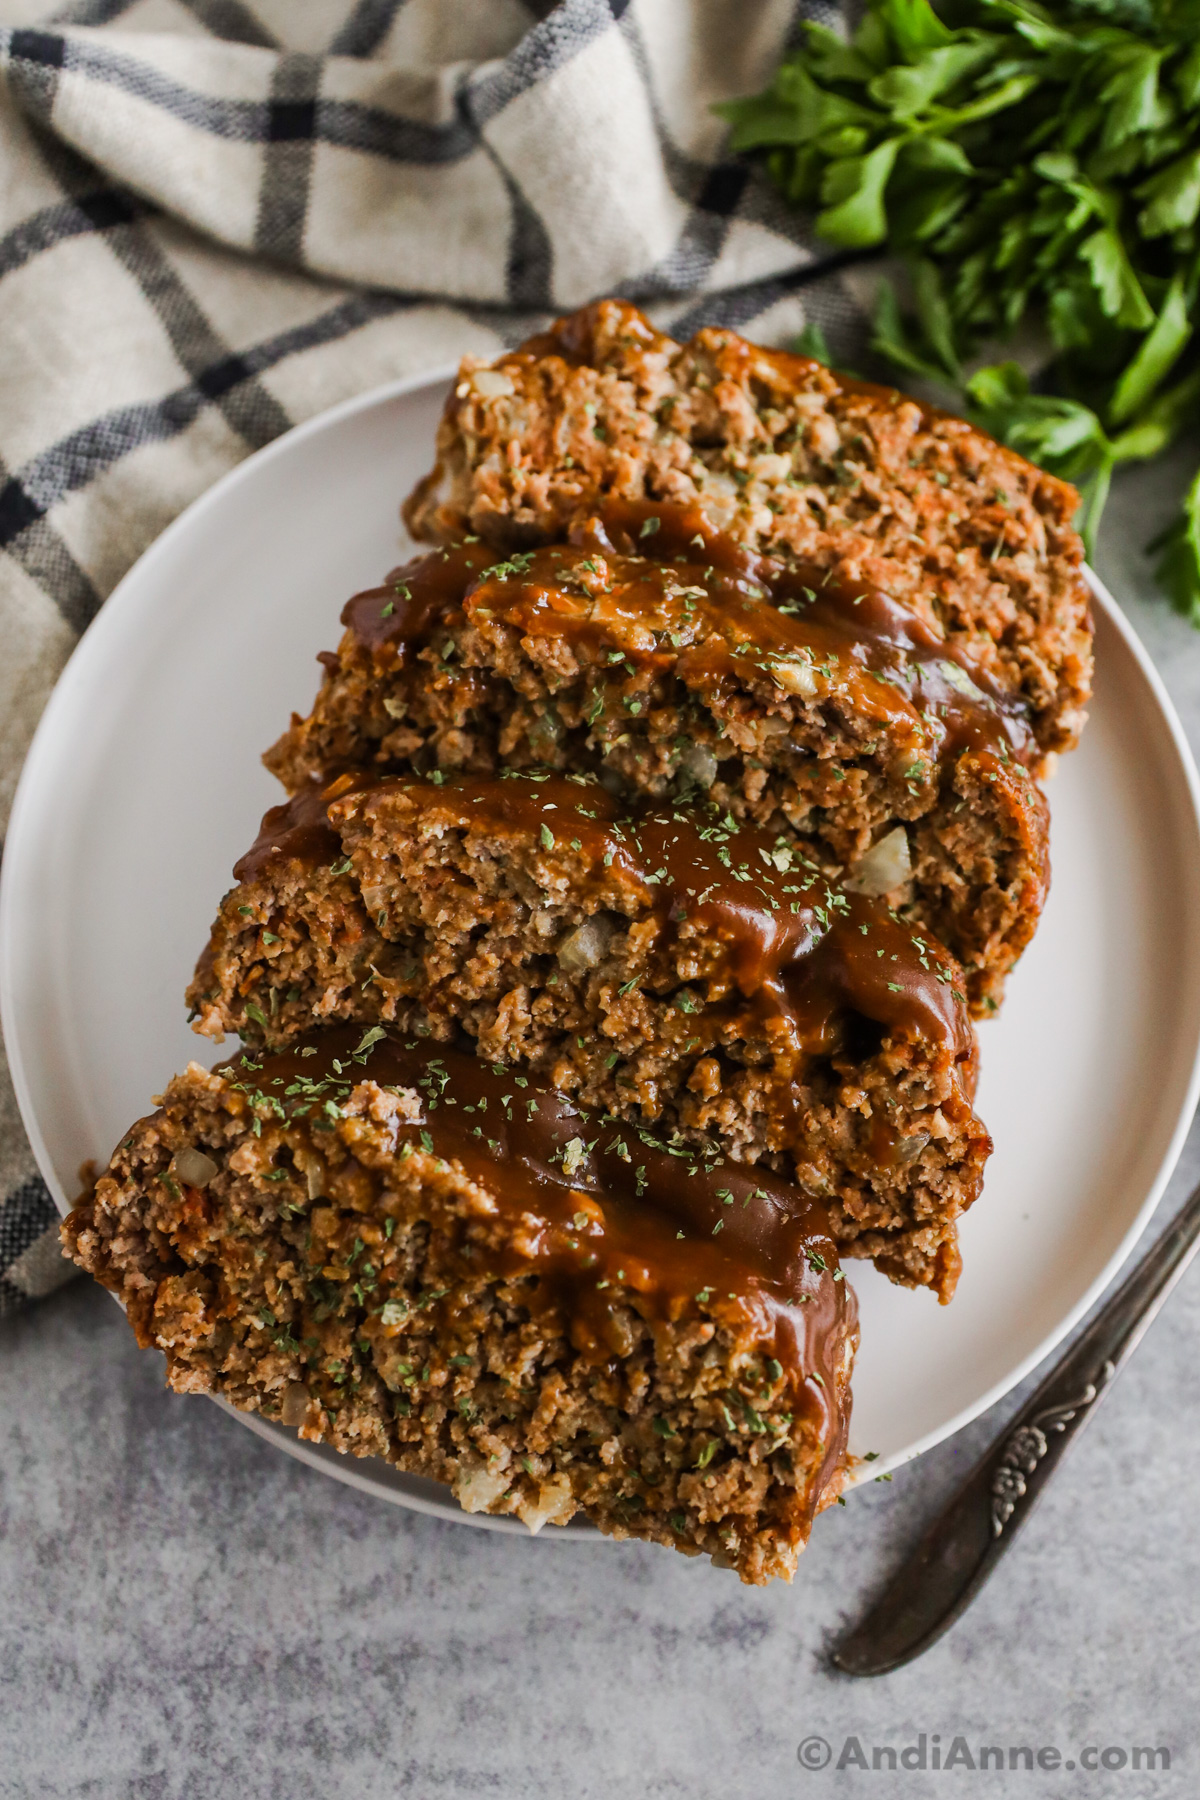 Slices of meatloaf with brown gravy on a white plate with a kitchen towel and parsley in the background.